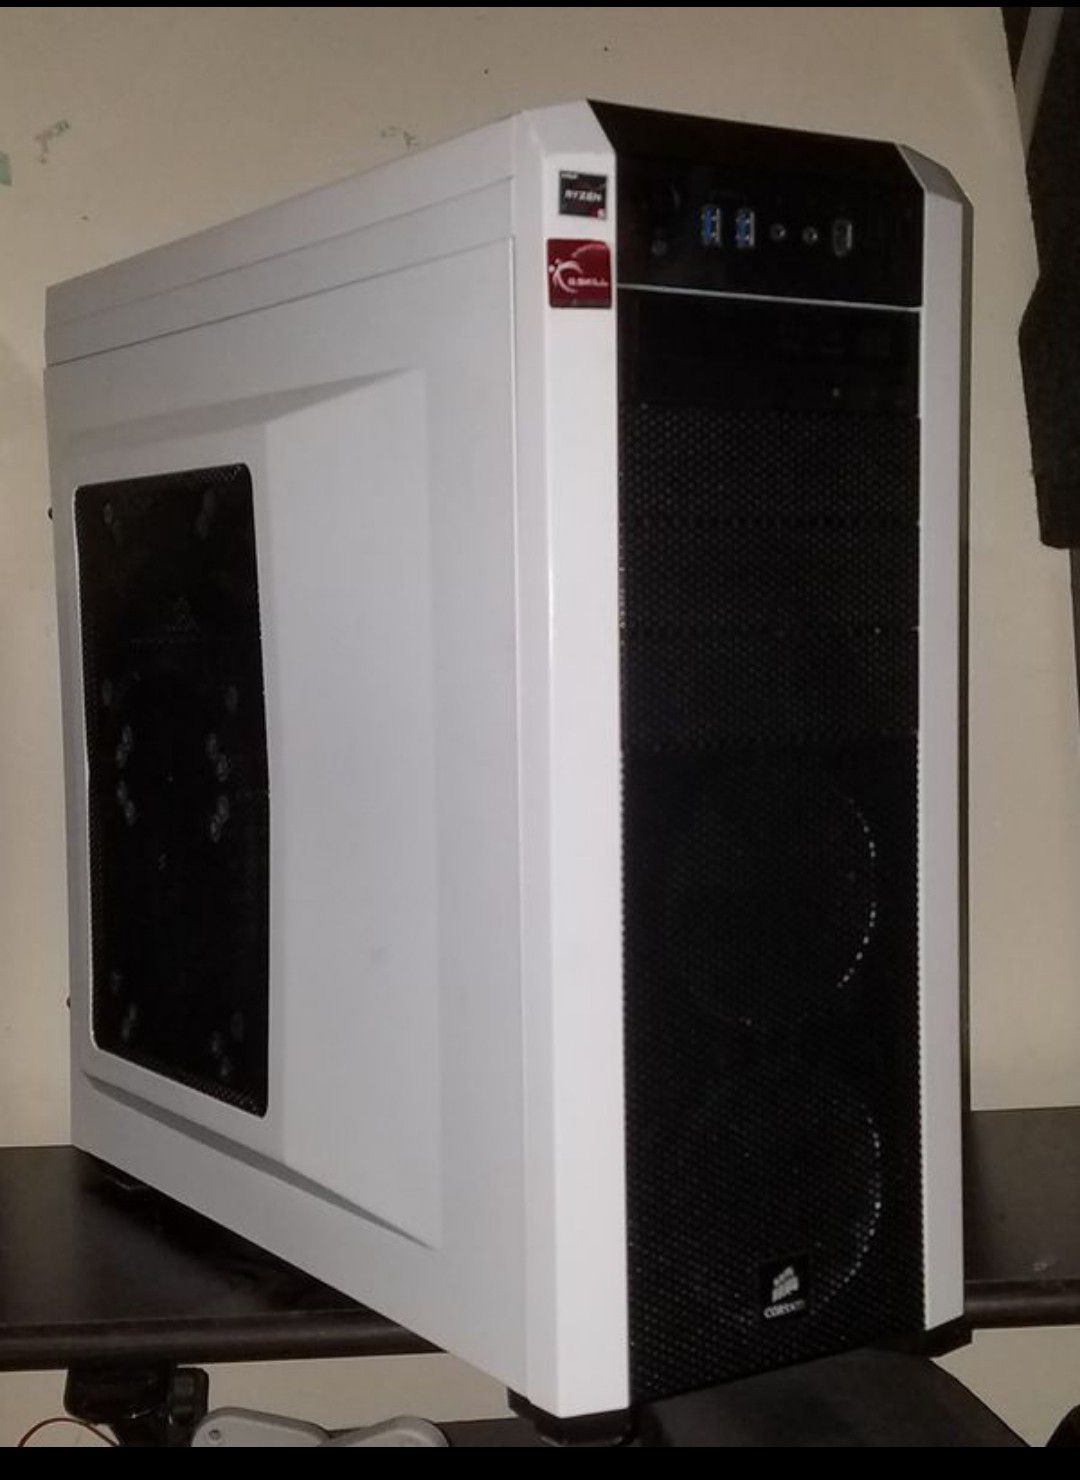 I7-3770 Gaming PC. 3.4 Ghz